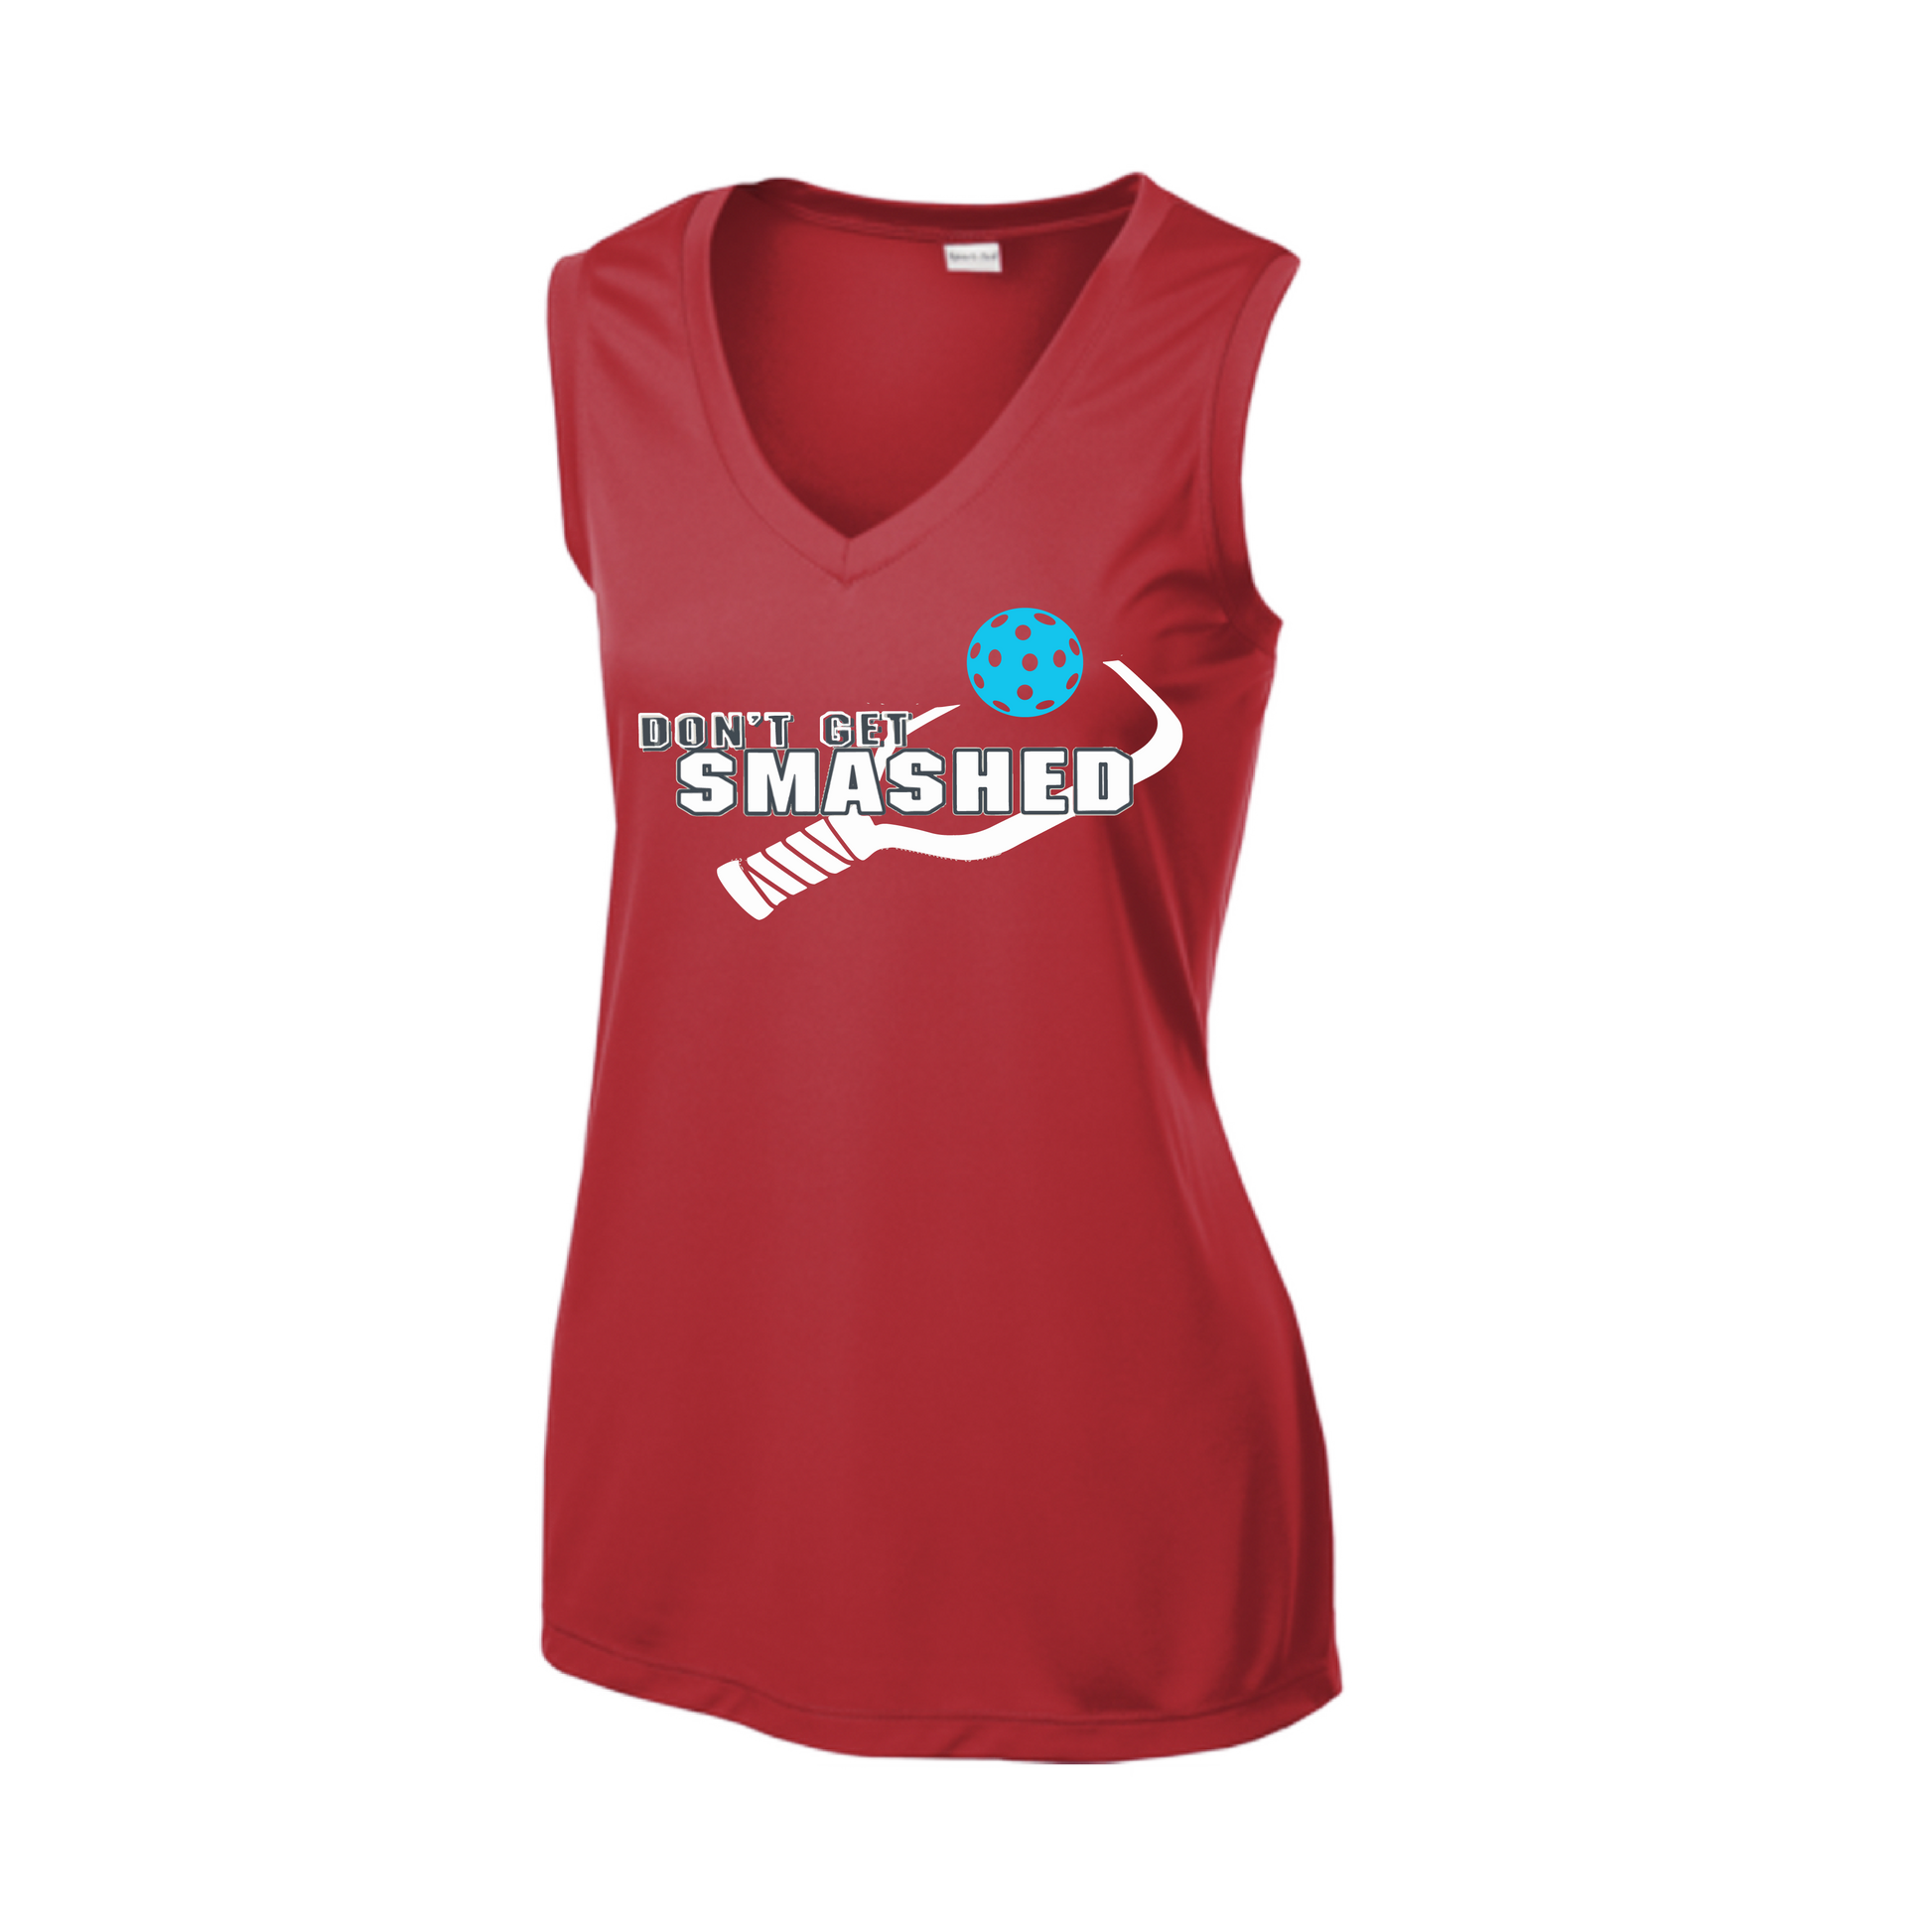 These pickleball sleeveless shirts are lightweight, roomy and airy. They are created with PosiCharge technology for enhanced color retention, effectively wicking away moisture for maximum athletic performance.